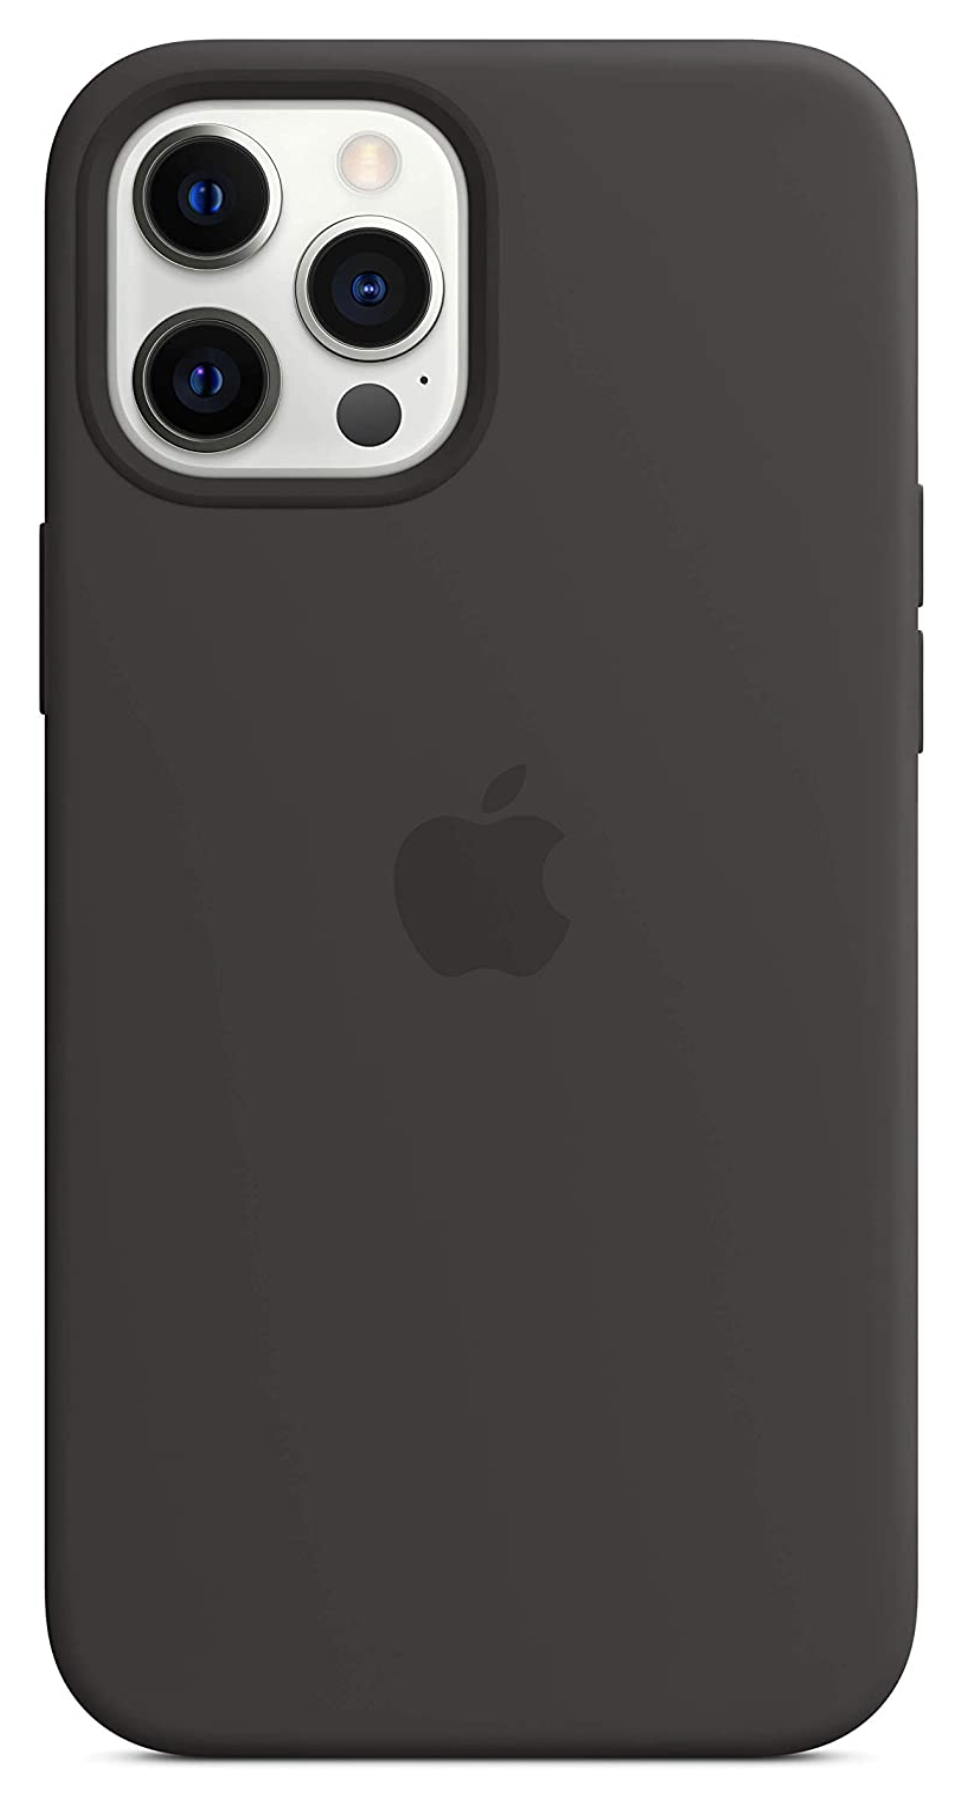 Apple iPhone 12 Pro Max Silicone Case with MagSafe - Black $29.99